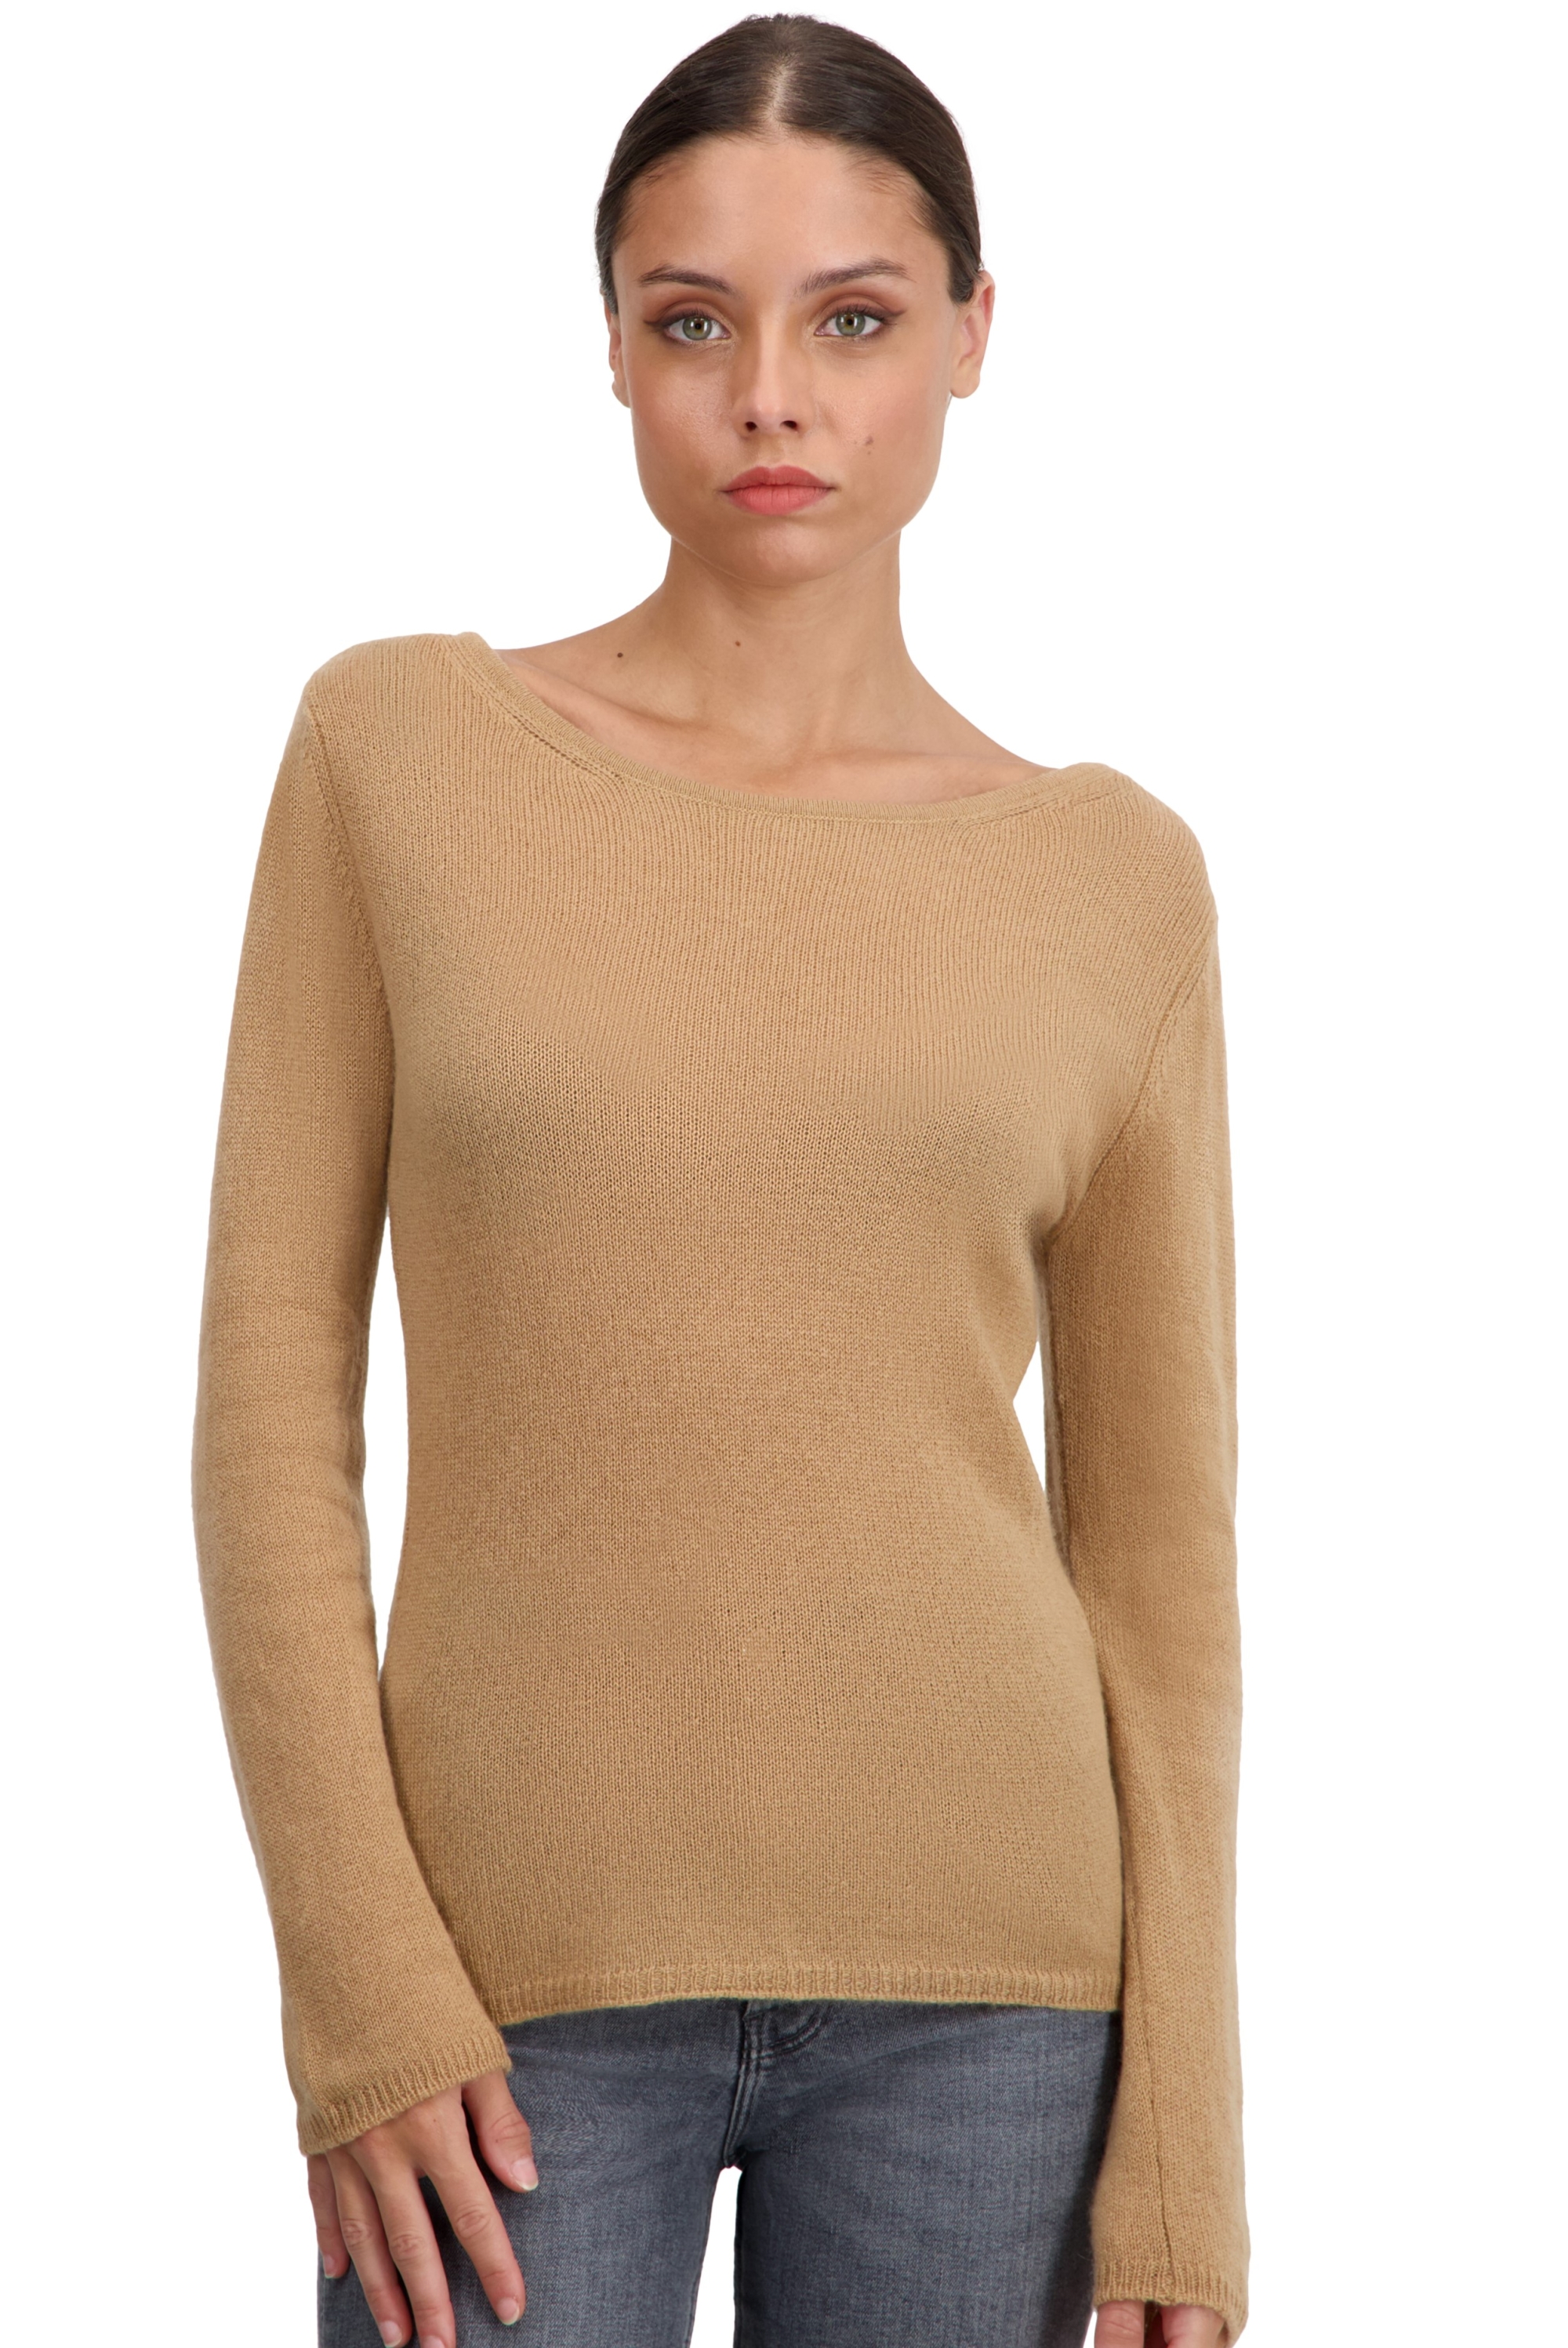 Cashmere ladies timeless classics caleen camel 4xl